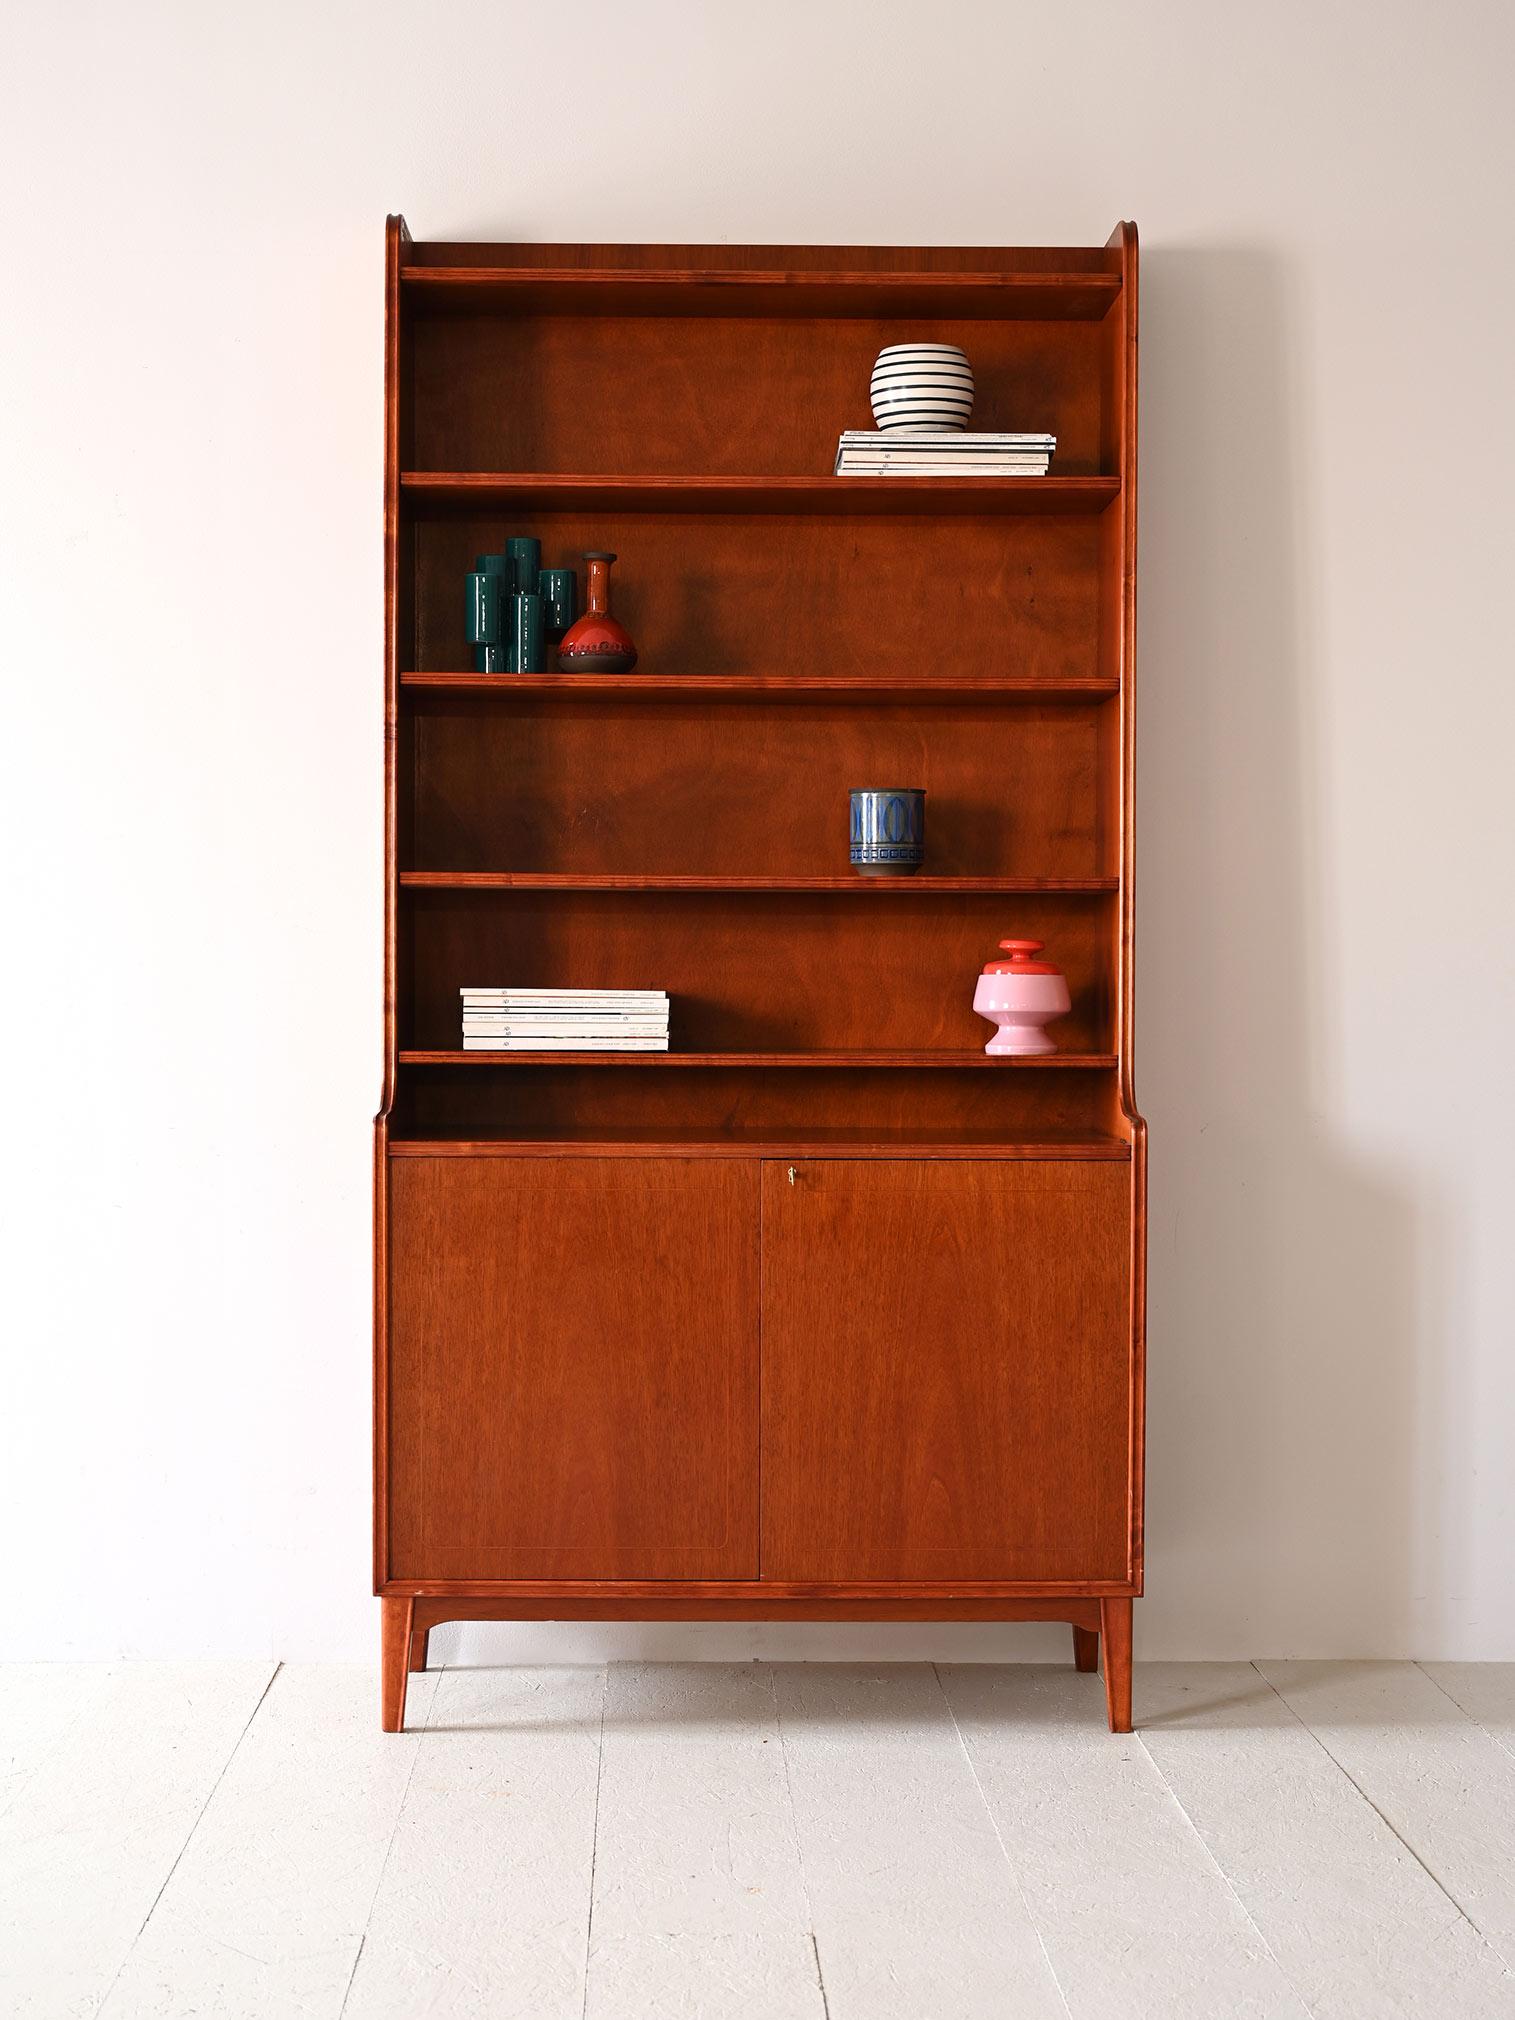 The shelves of this Swedish bookcase, help keep books and decorative items in order, while the doors below hide generous compartments for storing the less aesthetic elements of daily life. The balance between the warm vibrancy of the wood and the